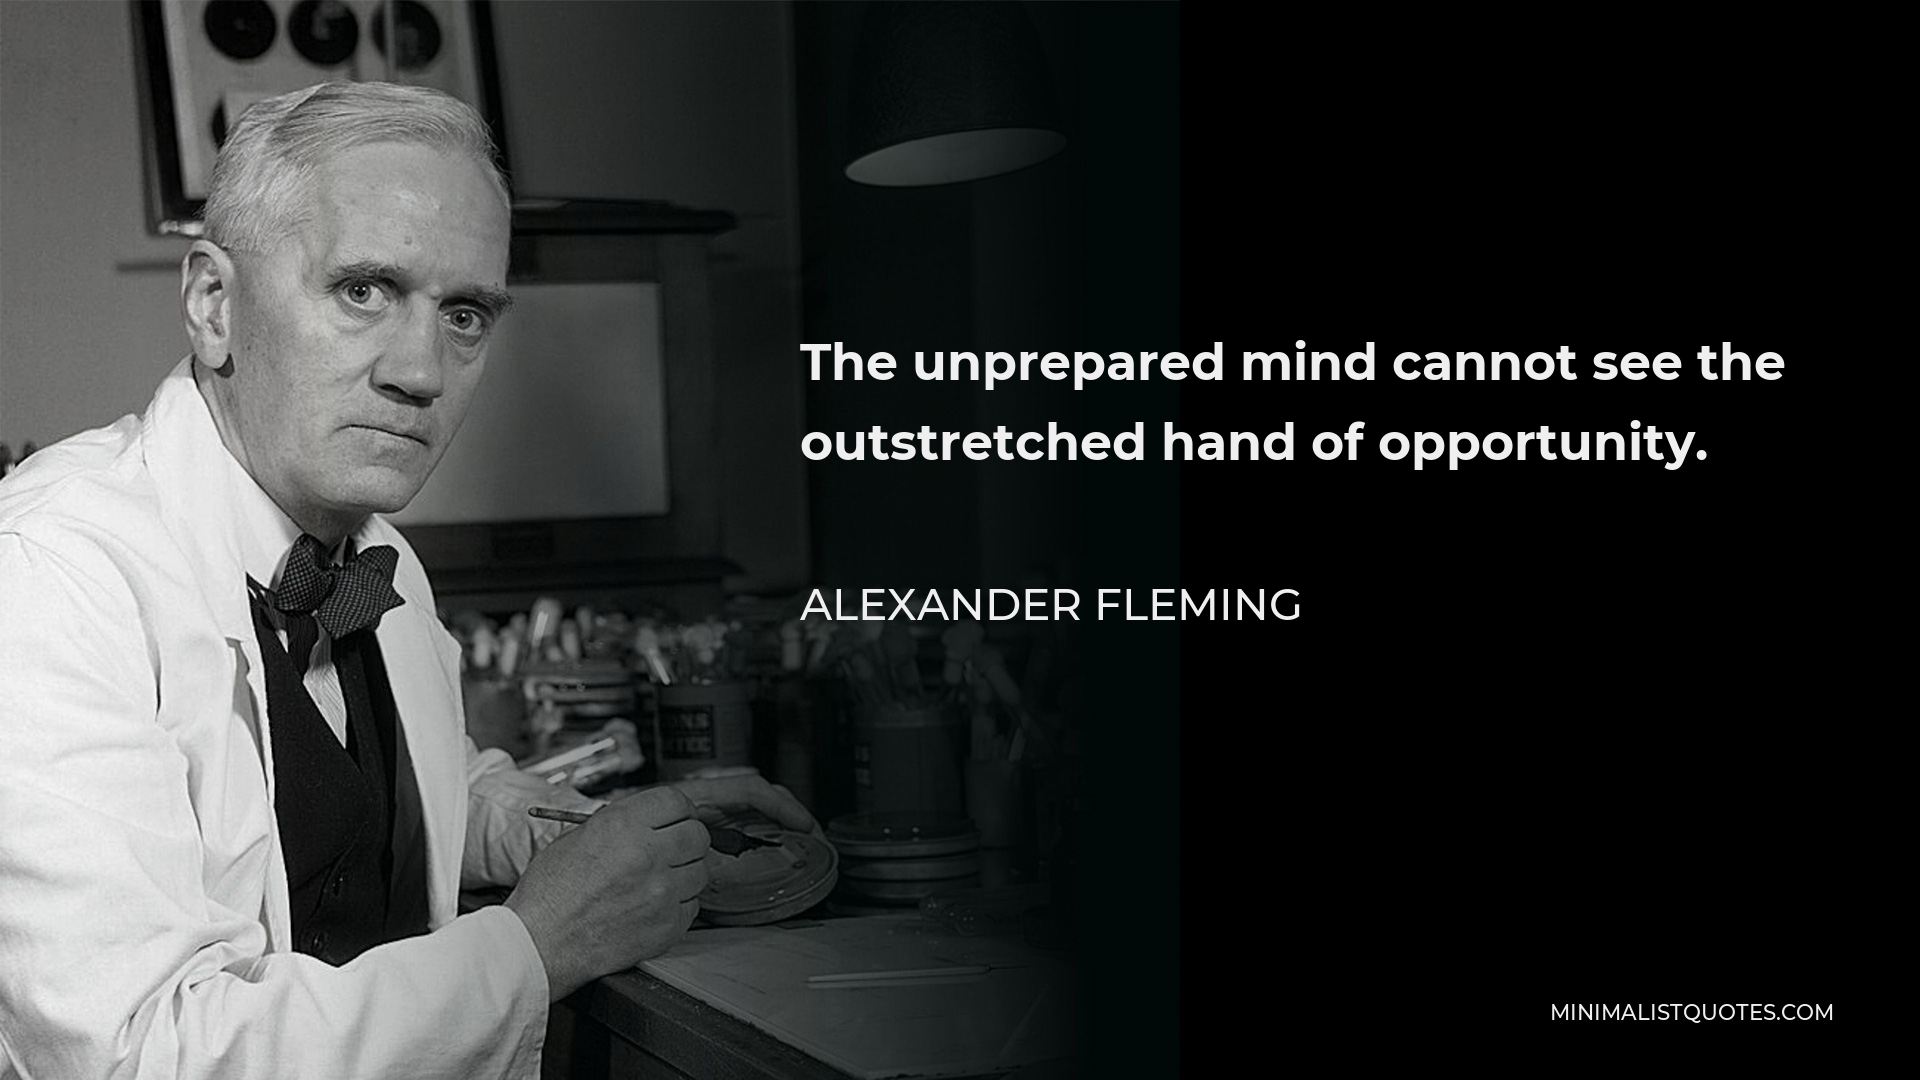 Alexander Fleming Quote - The unprepared mind cannot see the outstretched hand of opportunity.